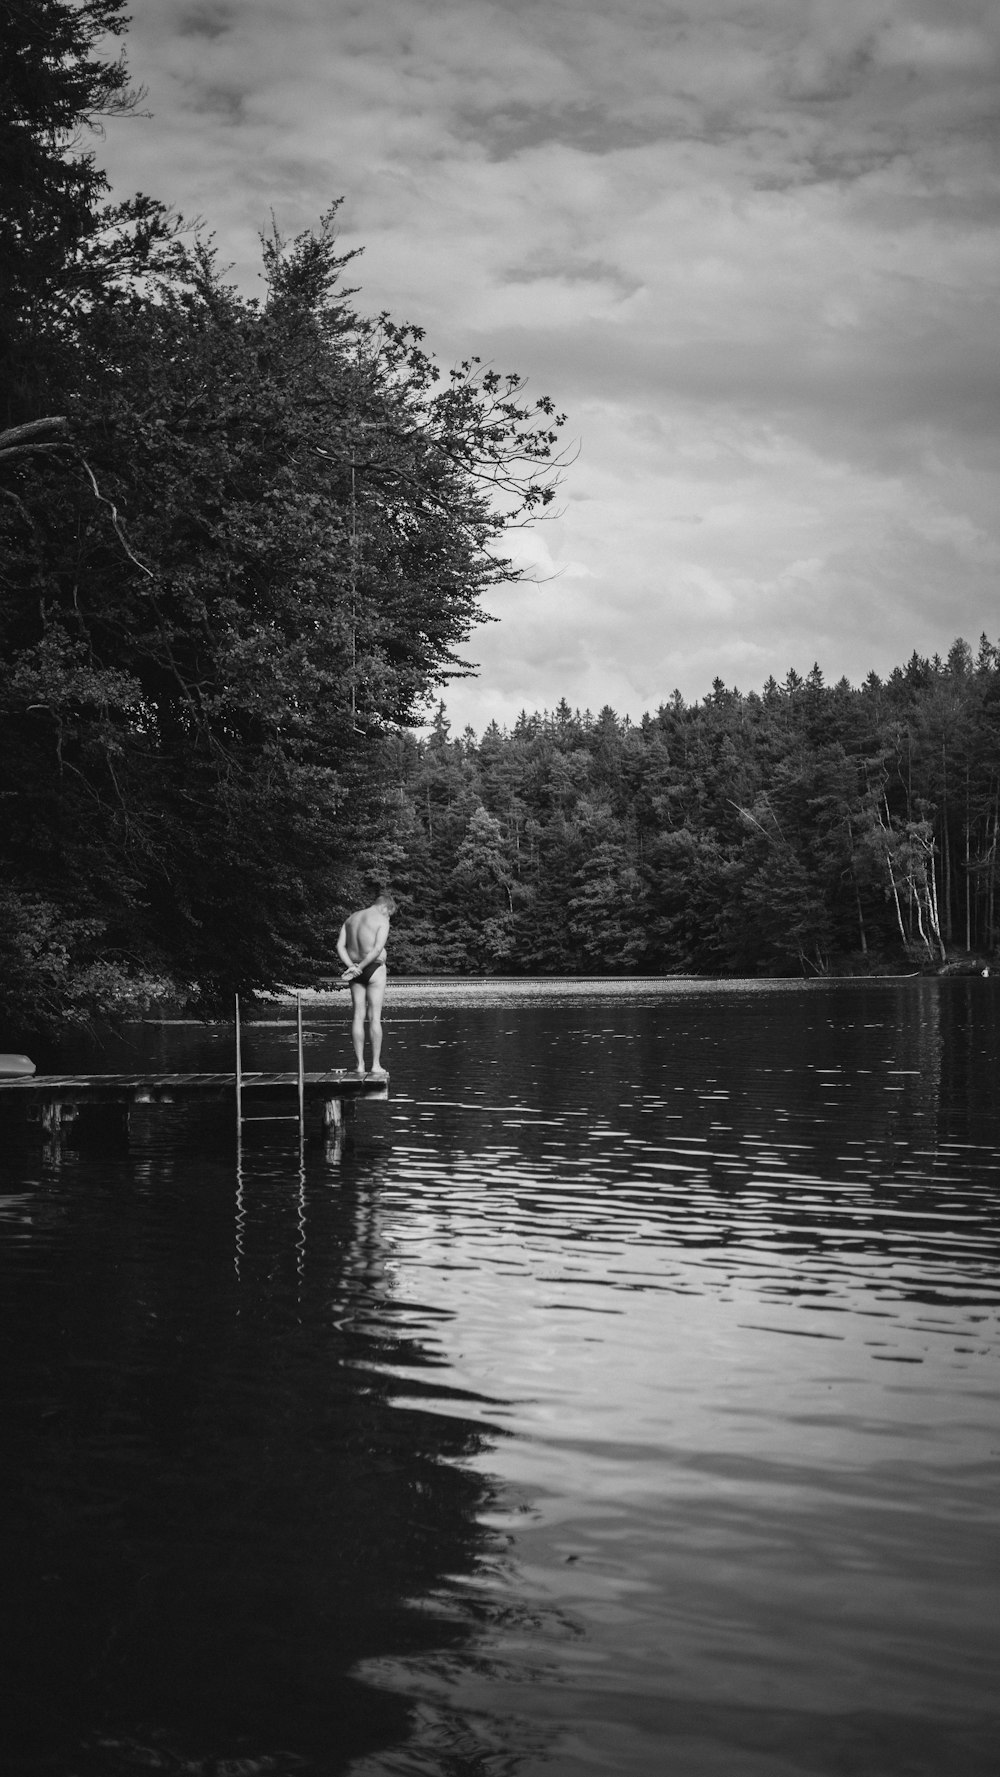 grayscale photo of trees near body of water under cloudy sky